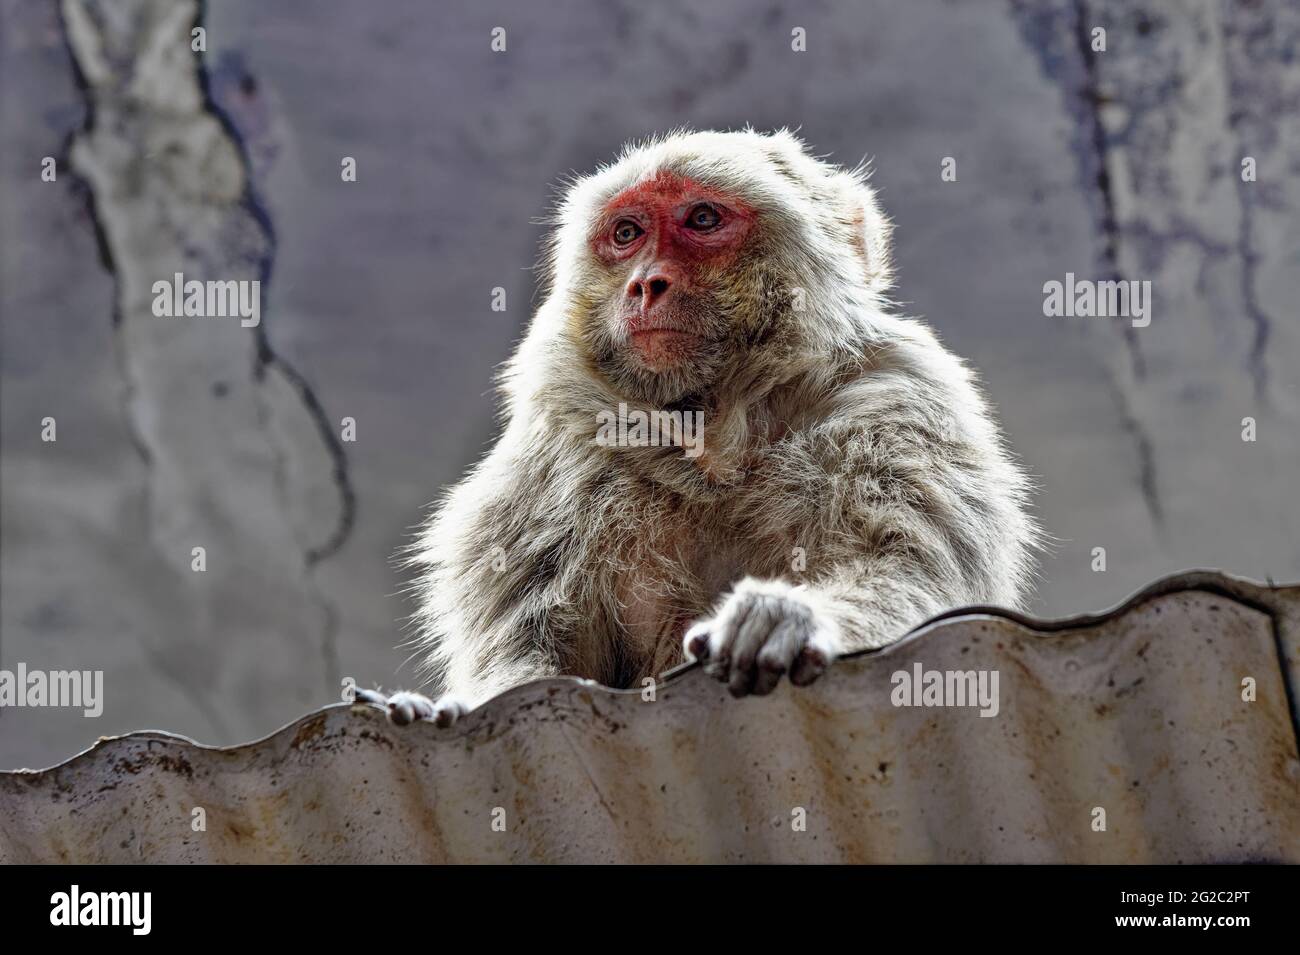 Rhesus Macaque in Chandni Chowk bazaar, one of the oldest market place in Old Delhi, India Stock Photo